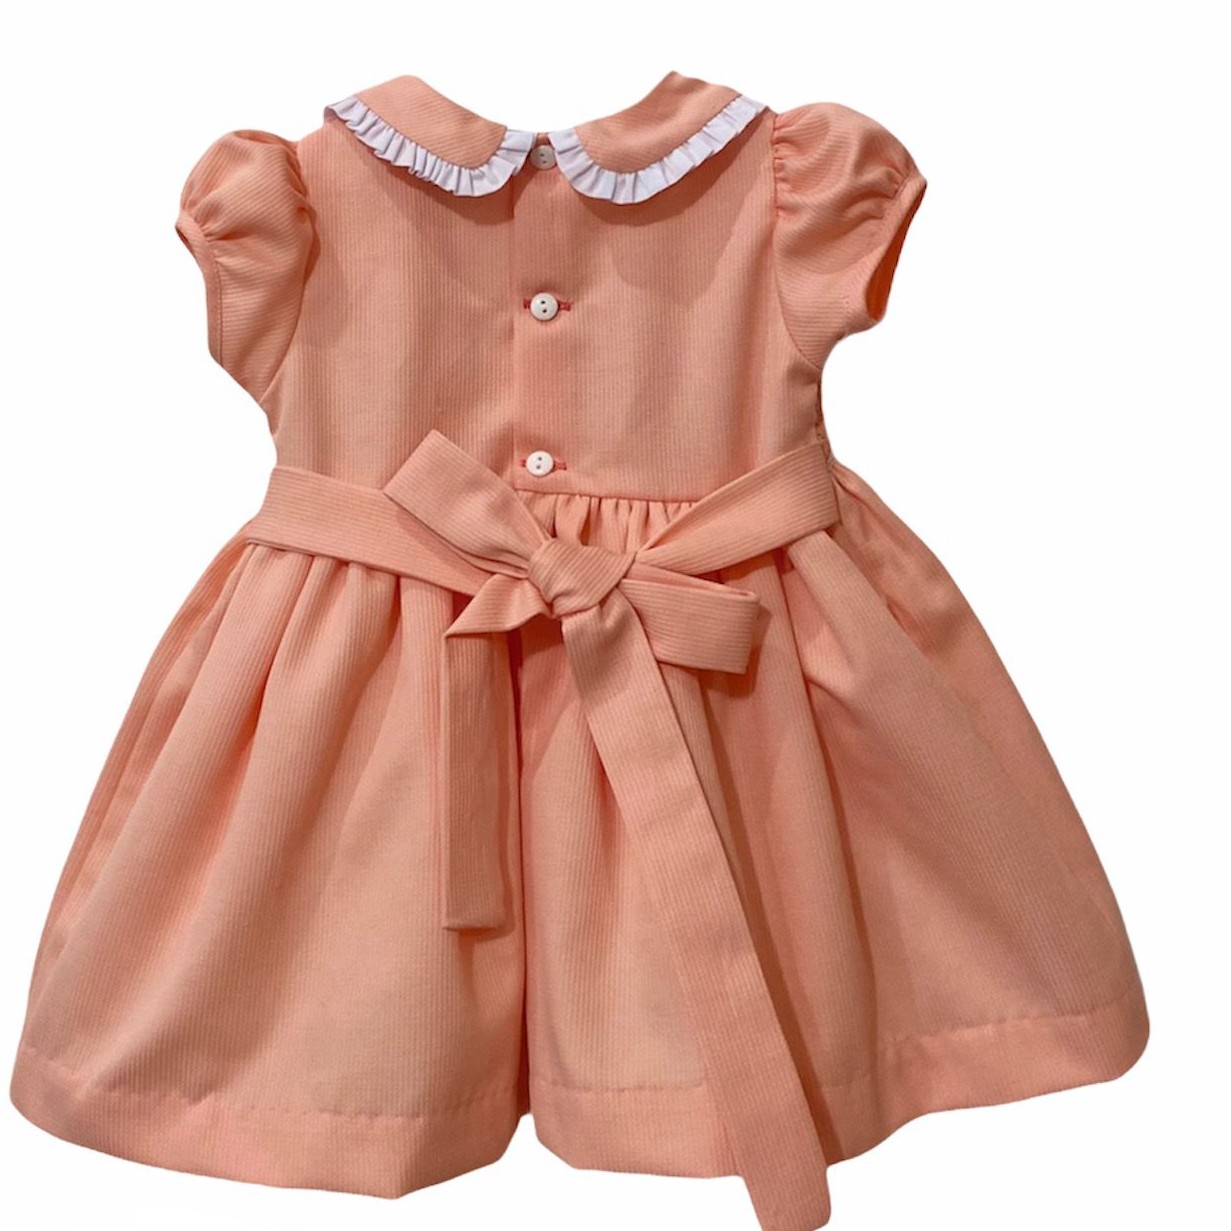 Girl's Dress with Hand Embroidery - Orange Color with White Details